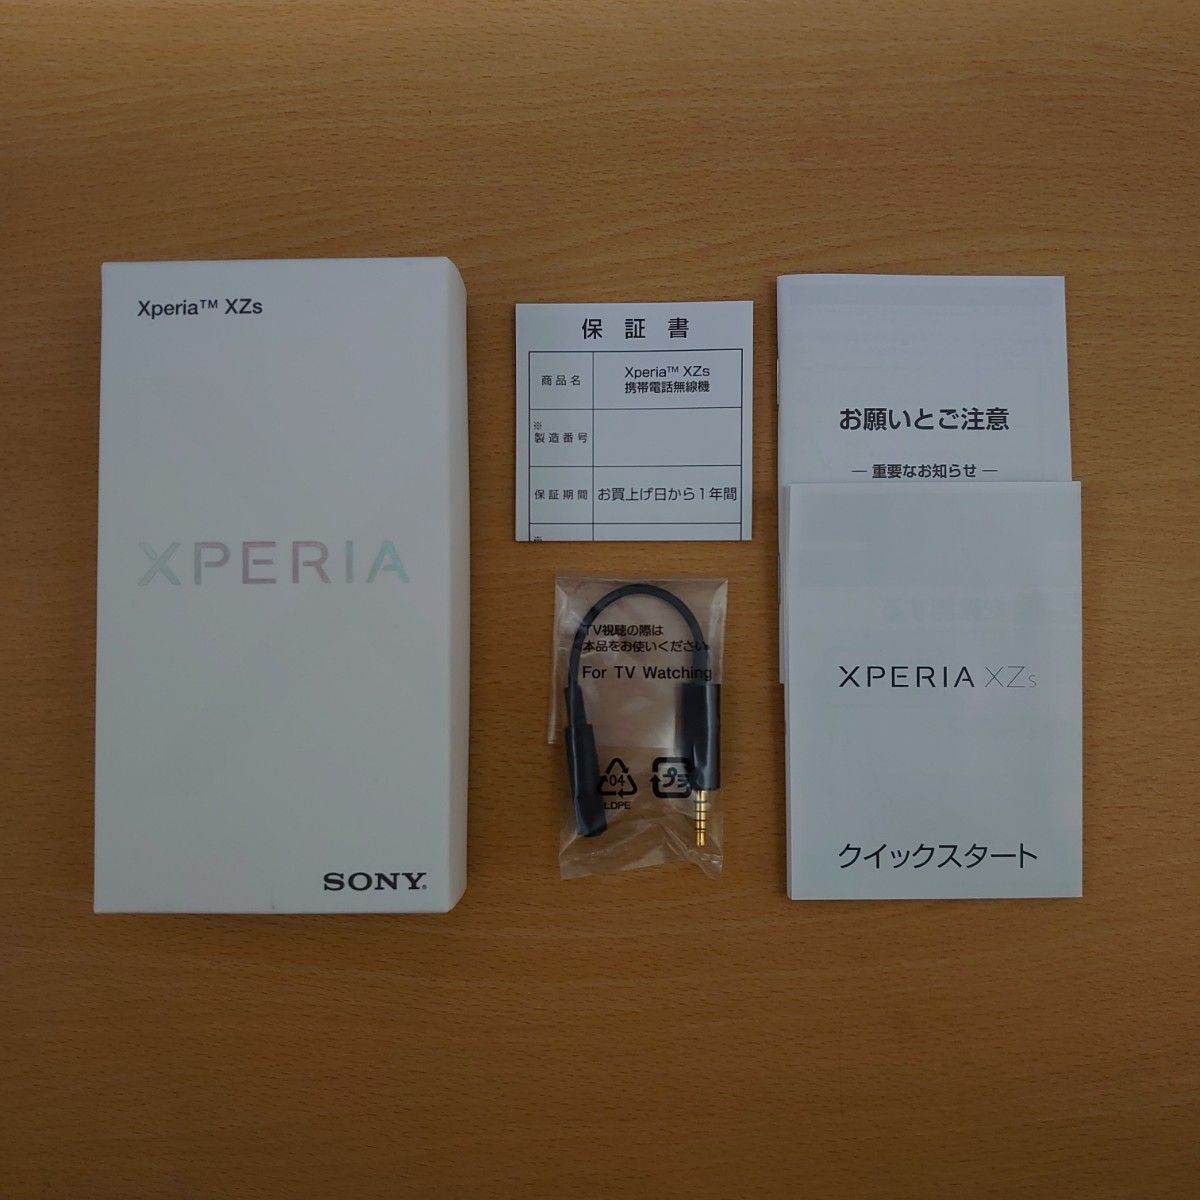 Xperia XZs (Warm Silver) ソフトバンク版 602SO【ジャンク品】